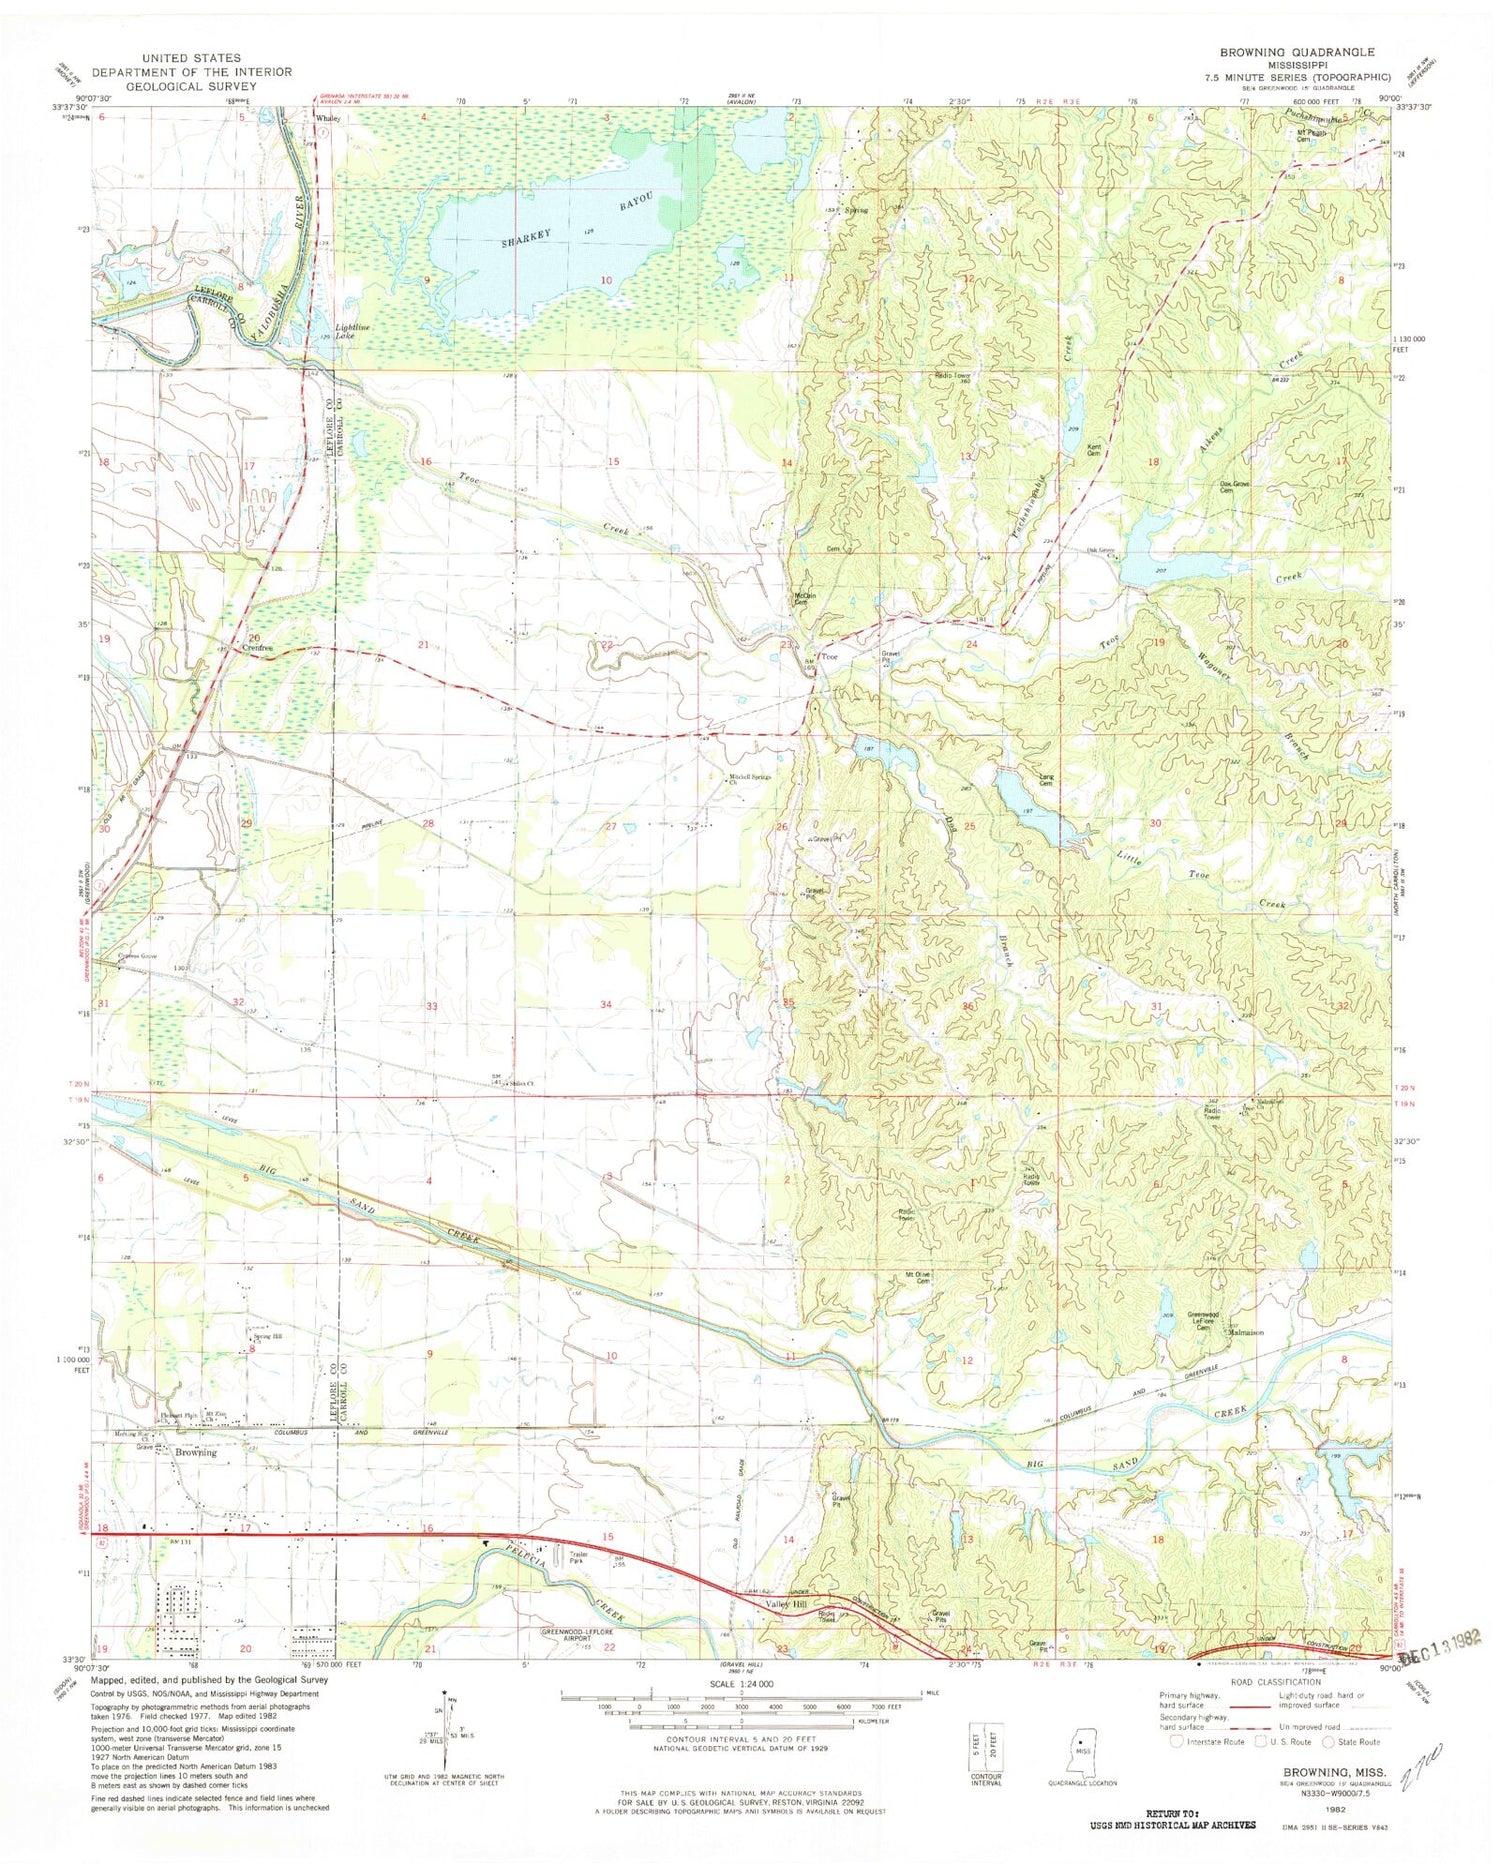 Classic USGS Browning Mississippi 7.5'x7.5' Topo Map Image